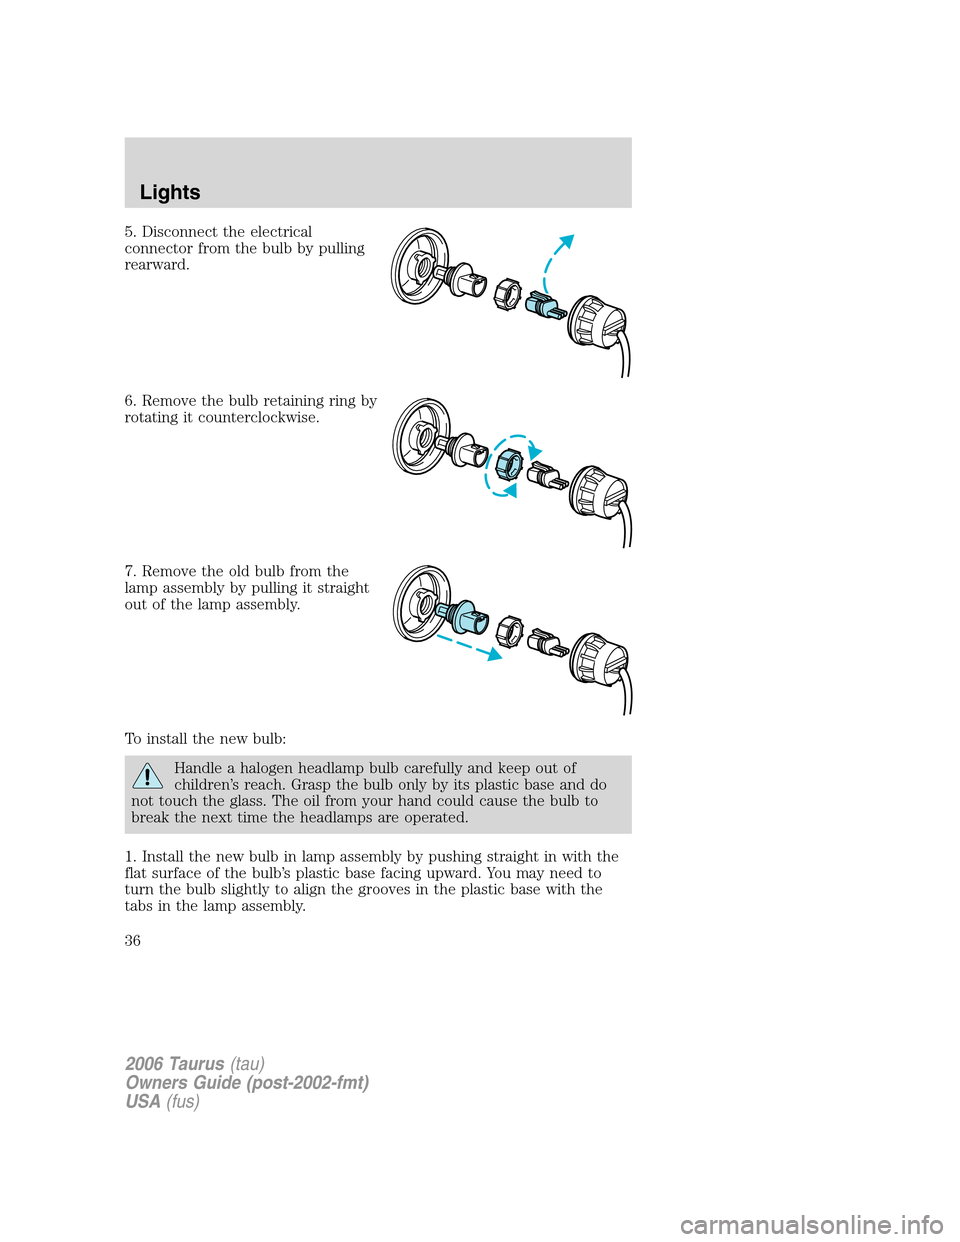 FORD TAURUS 2006 4.G Owners Guide 5. Disconnect the electrical
connector from the bulb by pulling
rearward.
6. Remove the bulb retaining ring by
rotating it counterclockwise.
7. Remove the old bulb from the
lamp assembly by pulling it